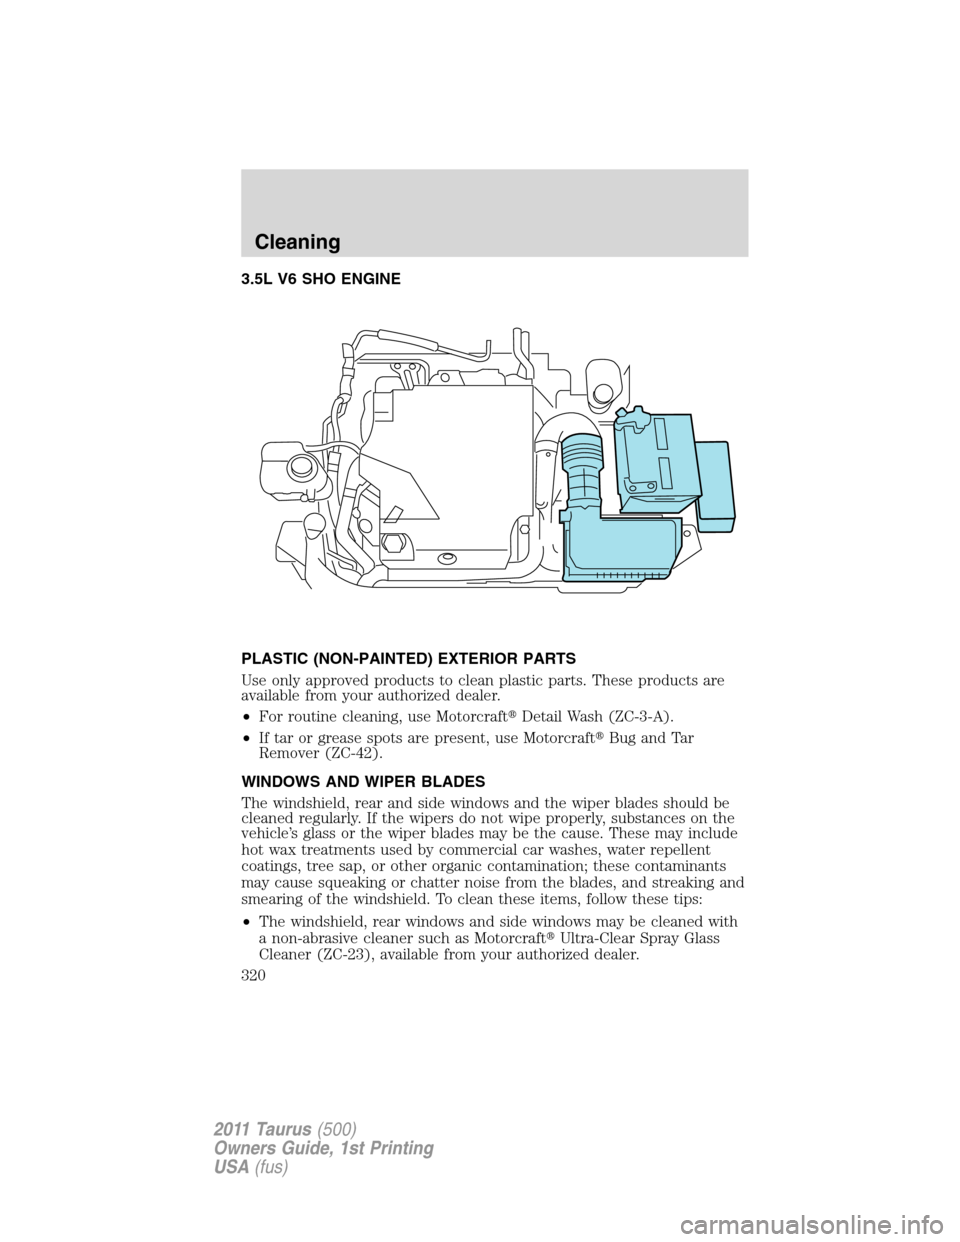 FORD TAURUS 2011 6.G Owners Guide 3.5L V6 SHO ENGINE
PLASTIC (NON-PAINTED) EXTERIOR PARTS
Use only approved products to clean plastic parts. These products are
available from your authorized dealer.
•For routine cleaning, use Motorc